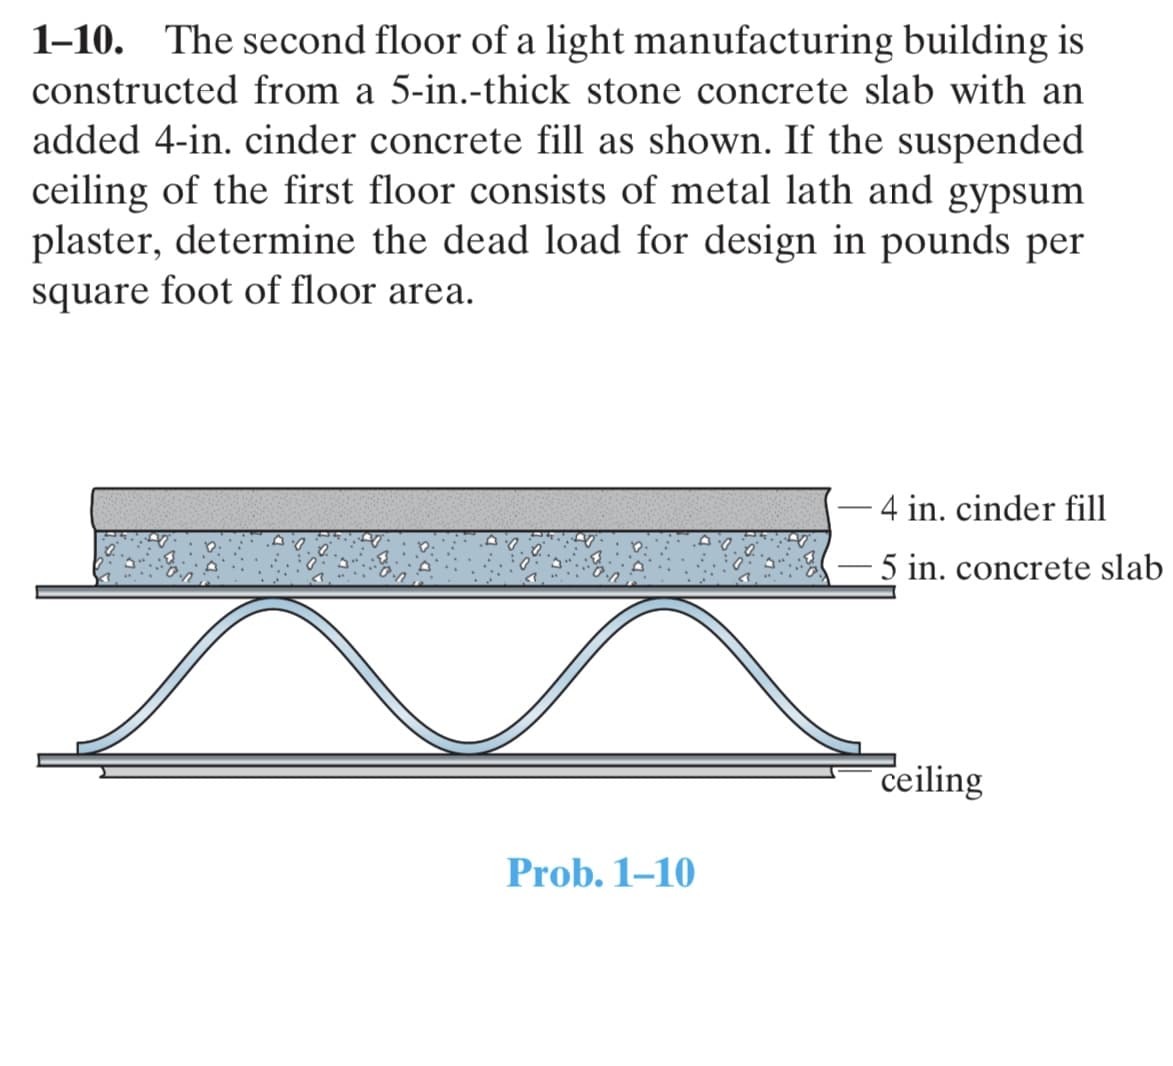 1-10. The second floor of a light manufacturing building is
constructed from a 5-in.-thick stone concrete slab with an
added 4-in. cinder concrete fill as shown. If the suspended
ceiling of the first floor consists of metal lath and gypsum
plaster, determine the dead load for design in pounds per
square
foot of floor area.
- 4 in. cinder fill
-
5 in. concrete slab
ceiling
Prob. 1–10
